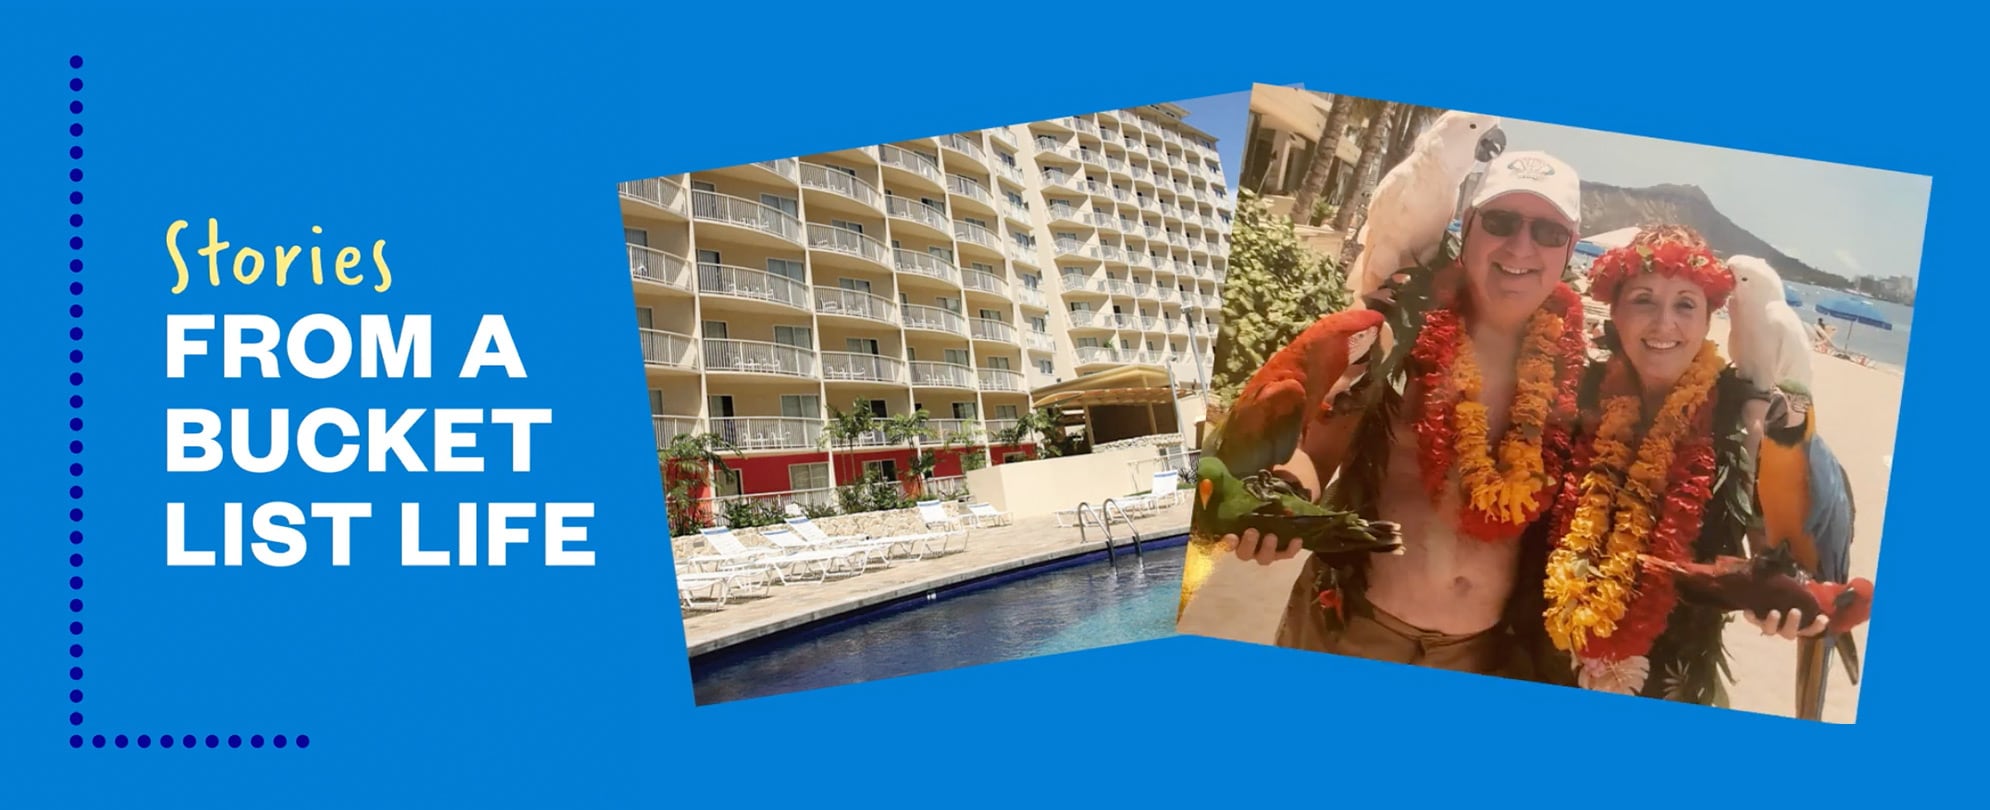 Club Wyndham timeshare owners in the Stories From A Bucket List Life video series